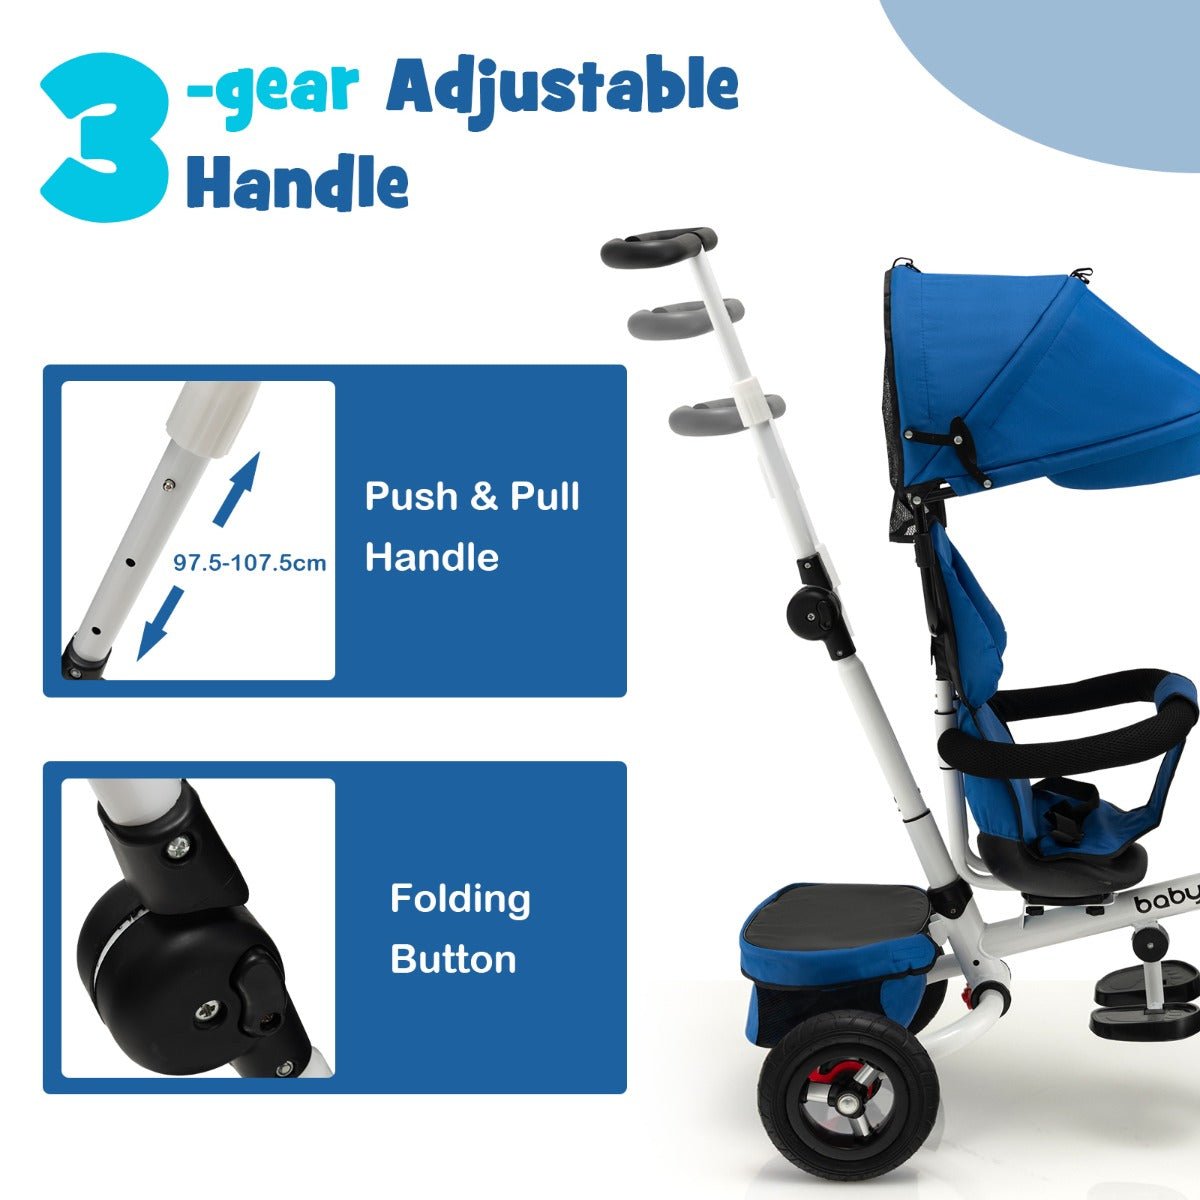 Safe and Stylish: Blue Tricycle Stroller with Sun Canopy